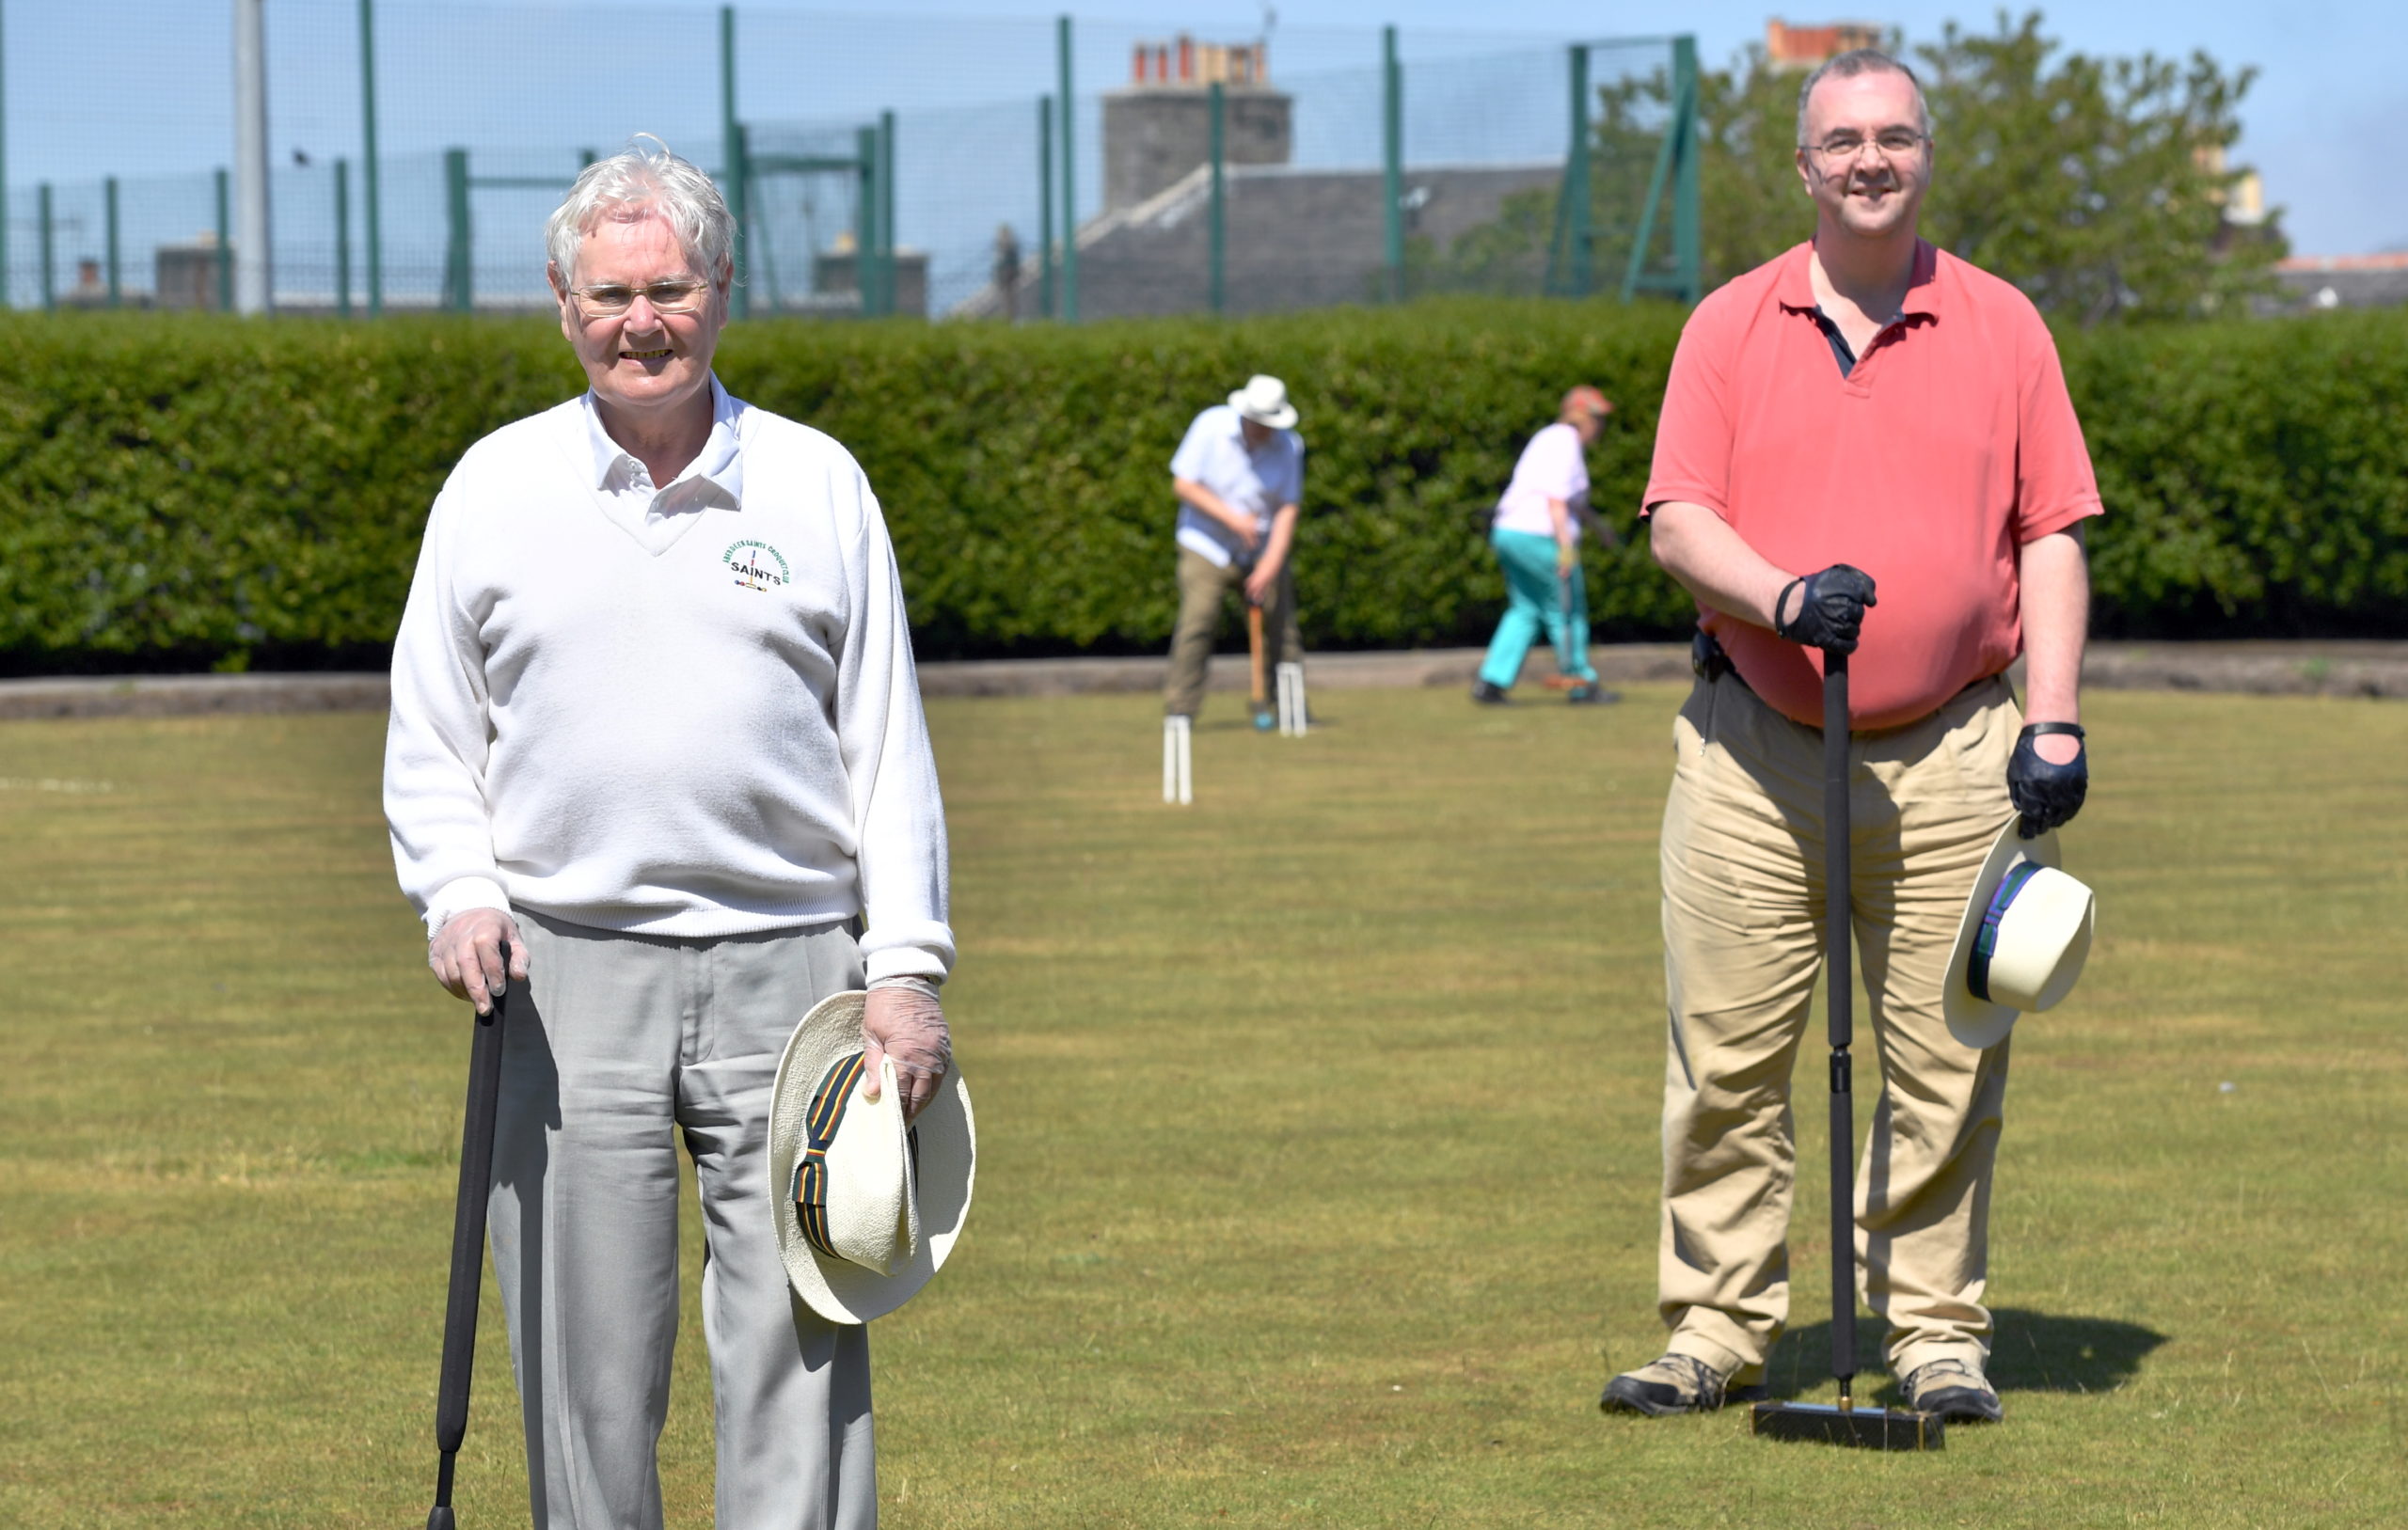 CR00221582     
Coronavirus / Covid19 ; 
Now that the lockdown has been eased, because we have entered phase one the paying of croquet is now allowed with some restrictions and social distancing. So members of the Aberdeen Saints Croquet Club have returned to their game at the Torry Outdoor Sports Centre, Victoria Road.     
Pictured - Club captain Charles Henderson (left) with club secretary Quentin Stephens as Ralph Rotheroe and Pamela Rotheroe-Hay play.    
Picture by Kami Thomson         01-06-2020